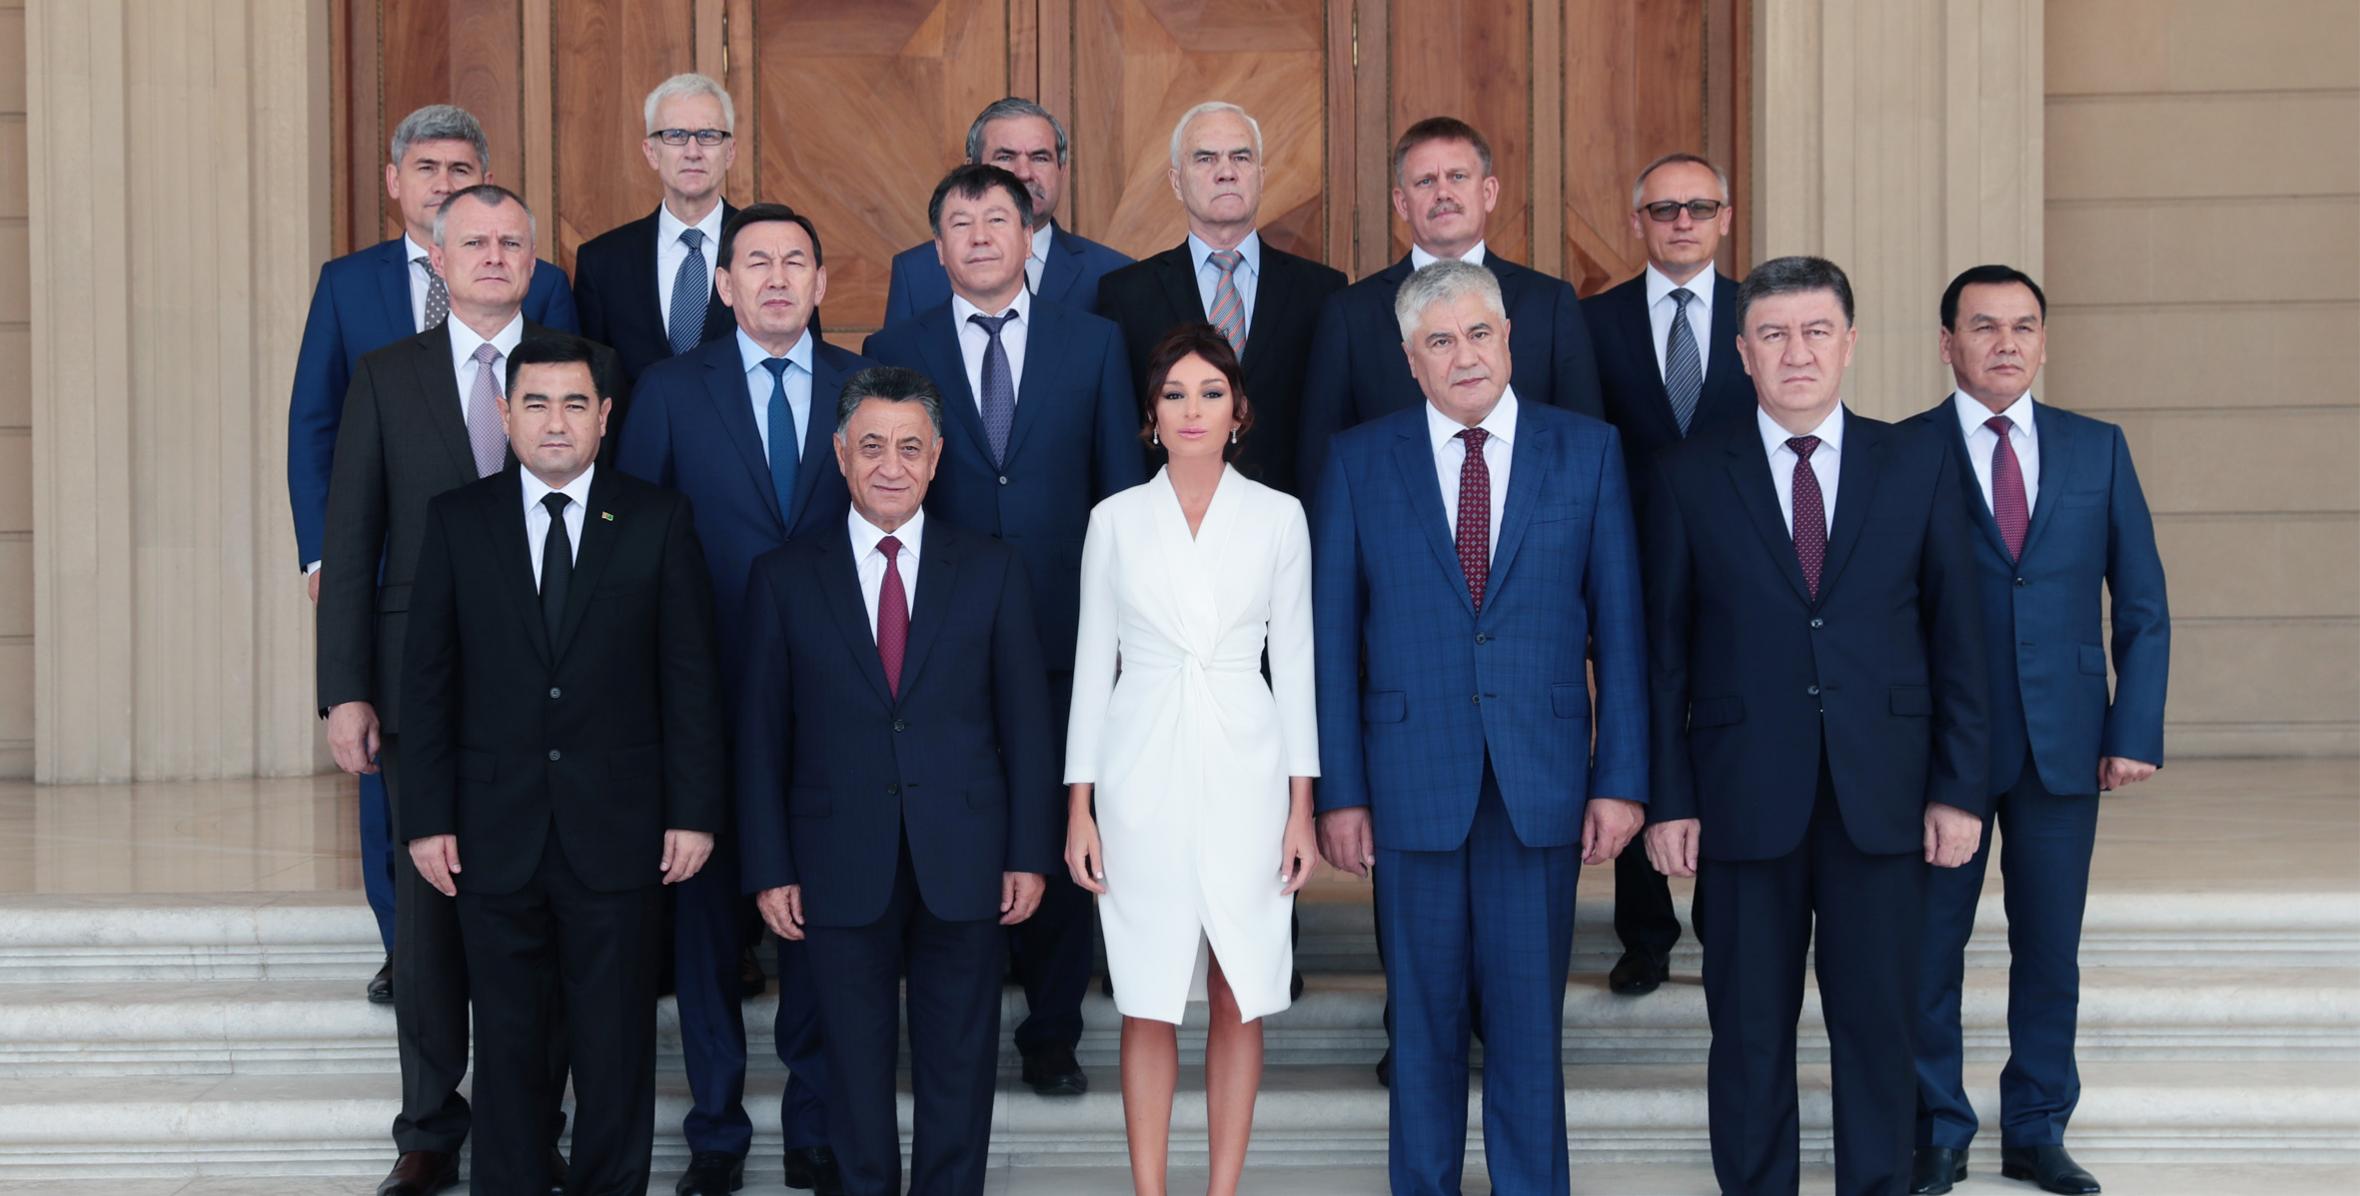 First Vice-President Mehriban Aliyeva met with participants of the meeting of Council of Ministers of Internal Affairs of CIS member states